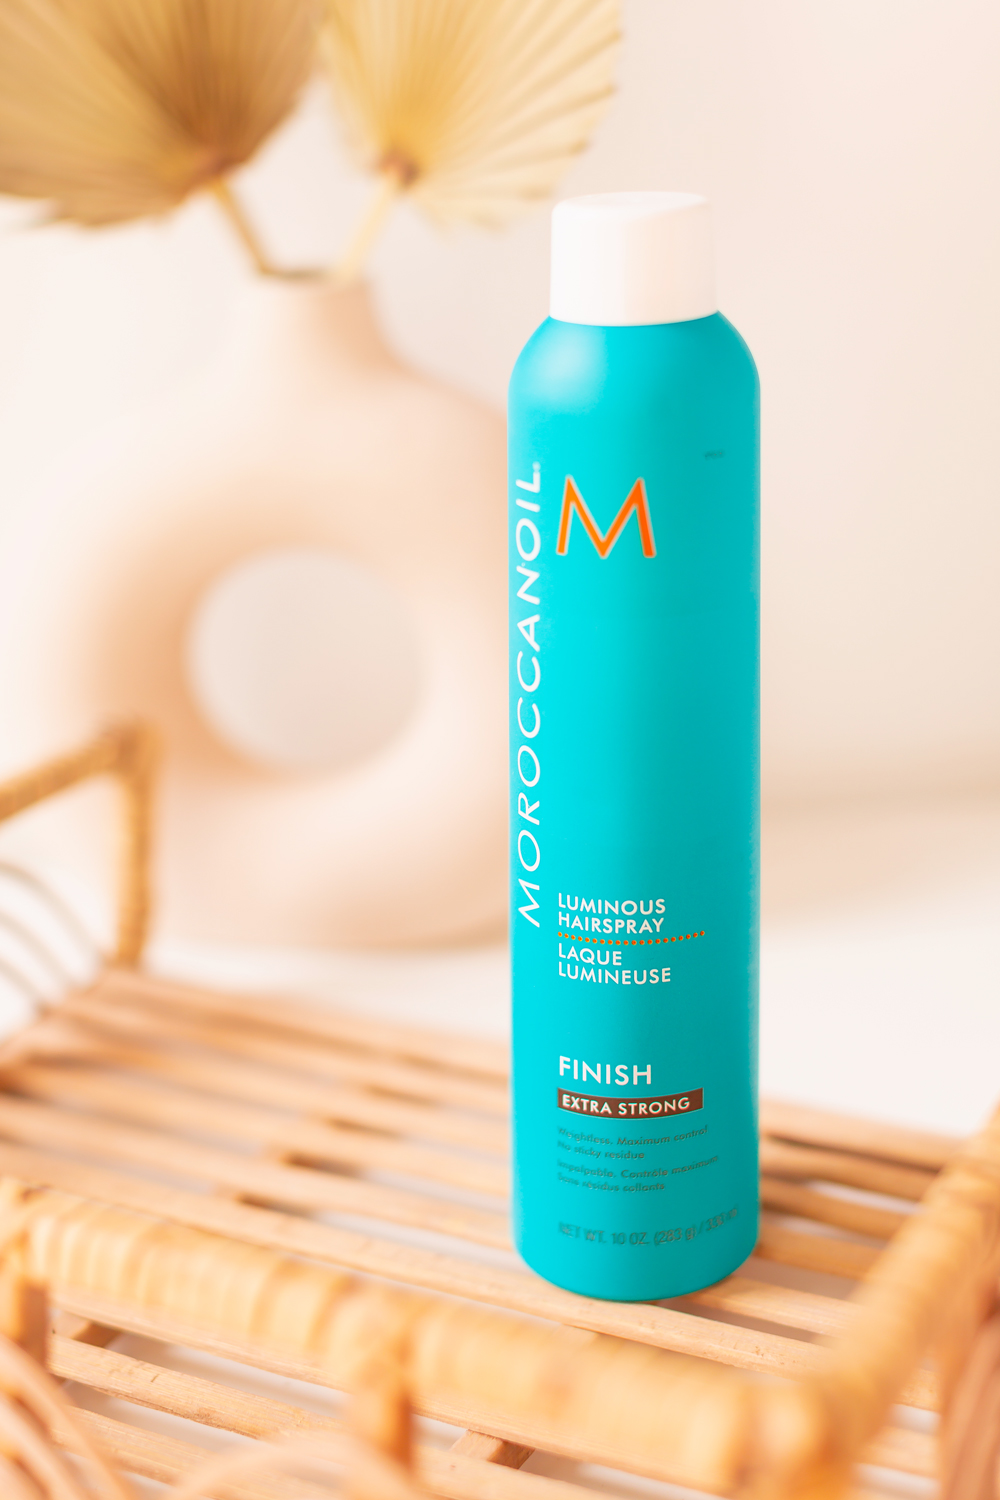 Moroccanoil Luminous Hairspray Extra Strong Photos, Review | Teal blue bottle of hairspray on a boho rattan tray| JustineCelina’s Haircare Routine for Long, Thick, Colour Treated Hair | Color-safe, sulphate free, phosphate free and paragon free haircare routine | MoroccanOil haircare routine | BeautySense review | JustineCelina’s favourite leave-in hair treatments | JustineCelina Hair | Hair growth tips | Hair growth products | Long Hair Secrets | Calgary Beauty Blogger // JustineCelina.com